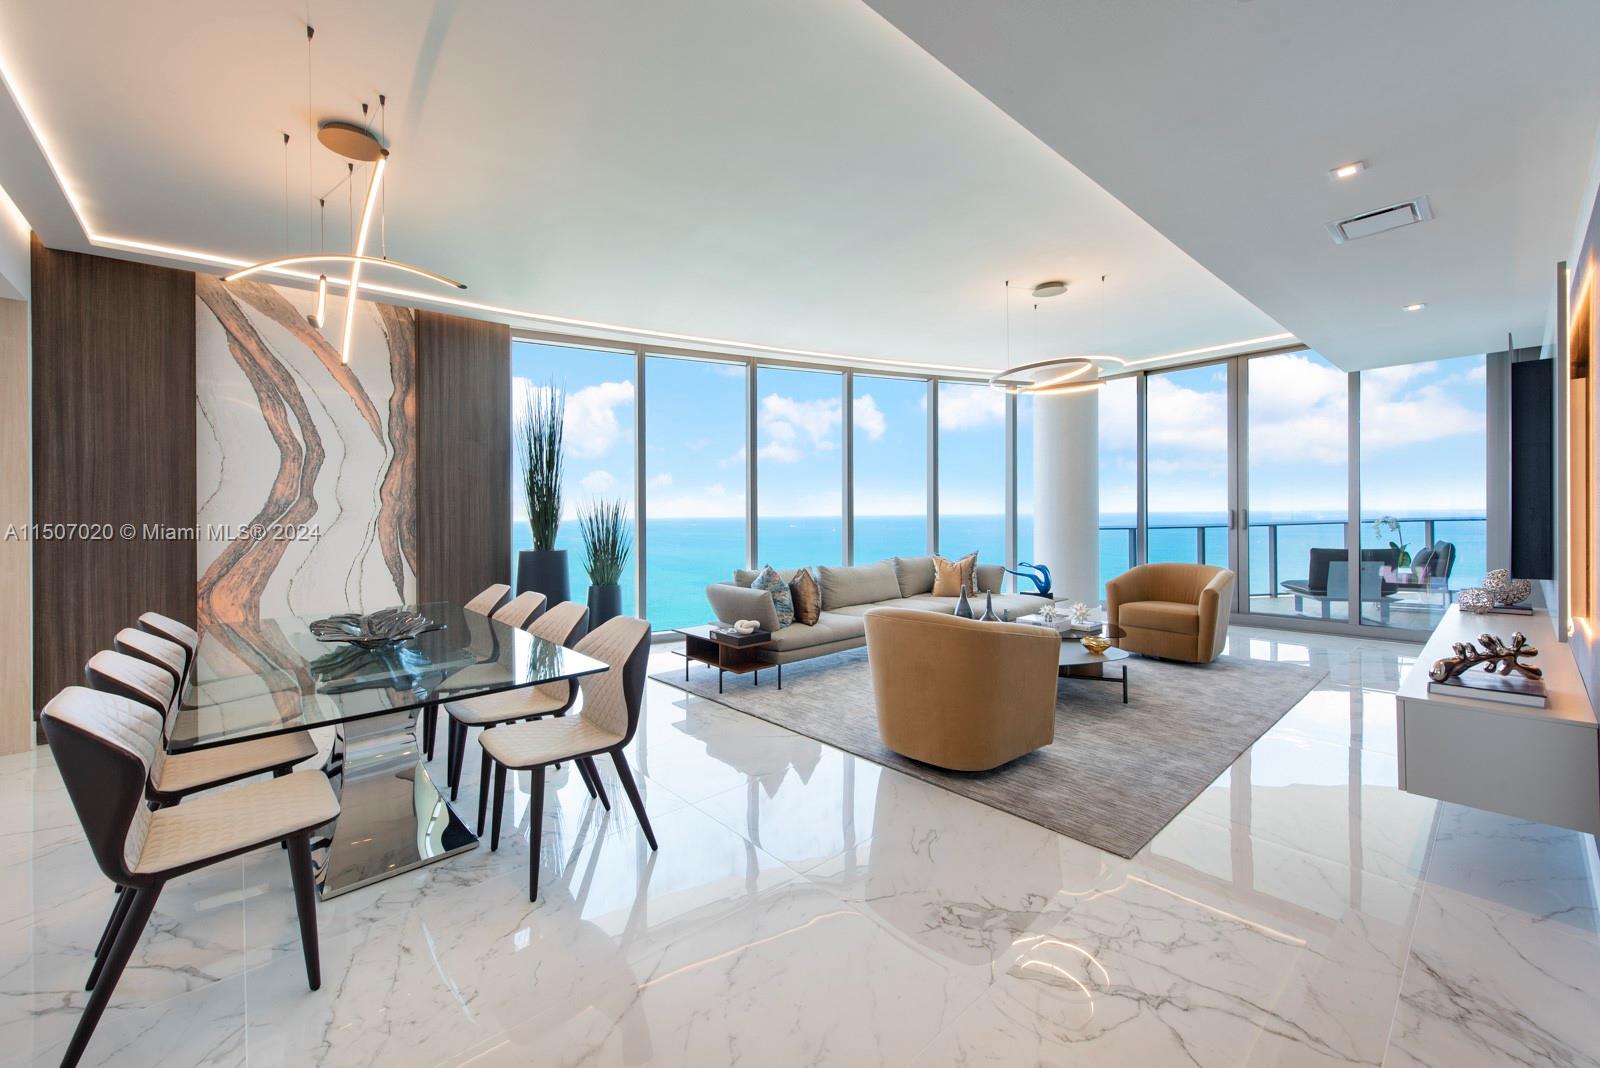 BRAND NEW. Modern contemporary oceanfront residence at the Ritz Carlton Sunny Isles. Unobstructed direct view of ocean, bay, sunsets & Miami skyline from every room. 3Bed+Den/4.1Baths. Open floorplan seamlessly connects the east & west living spaces. Filled w/ natural light. Designed by Steven G featuring a combination of stone, wood & mirrors creating a calming and welcoming environment. Oversized kitchen island perfect  for entertaining & host unforgettable gatherings, Snaidero Italian kitchen w/ Miele/SubZero appliances, master suite w/ endless directocean view. Built-in closets, electric black outs. Amenities: onsite restaurant, complimentary breakfast, 2 pools, Gym & Spa, kid’s area, complimentary valet. The Ritz Carlton has no limits to offer its residents an extraordinary lifestyle.